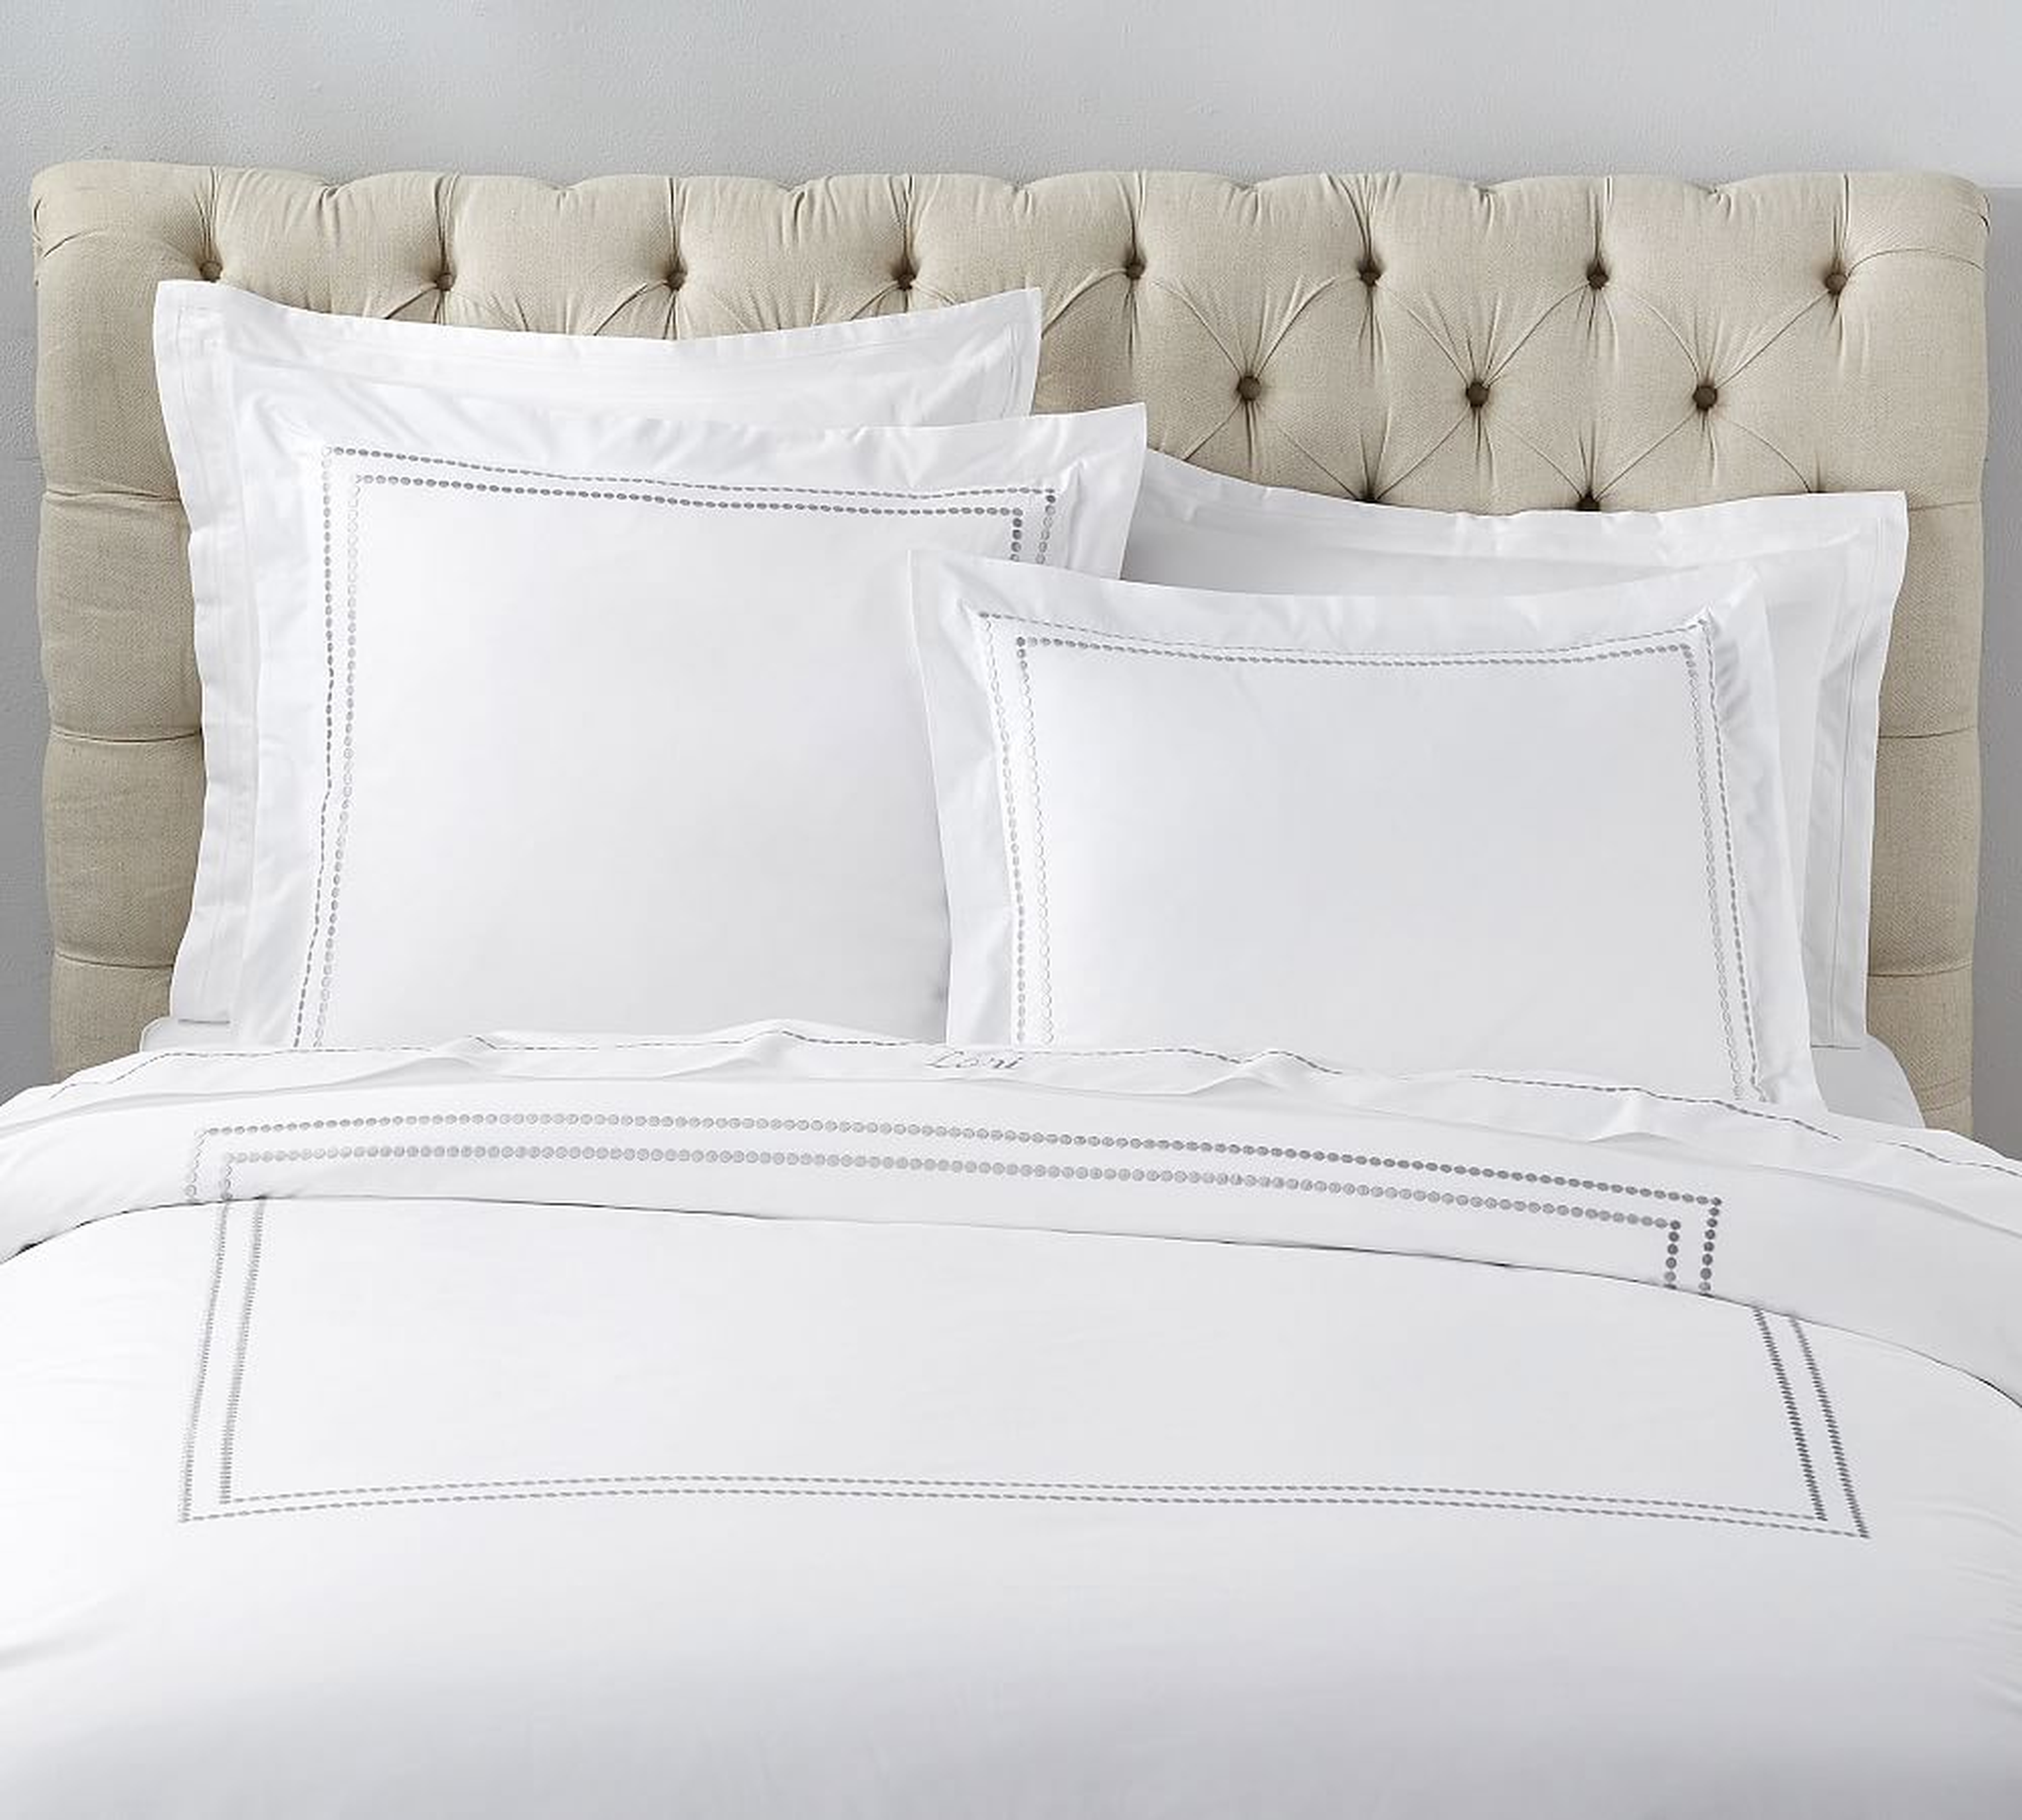 Pearl Organic Percale Duvet Cover, King/Cal. King, Gray Mist - Pottery Barn